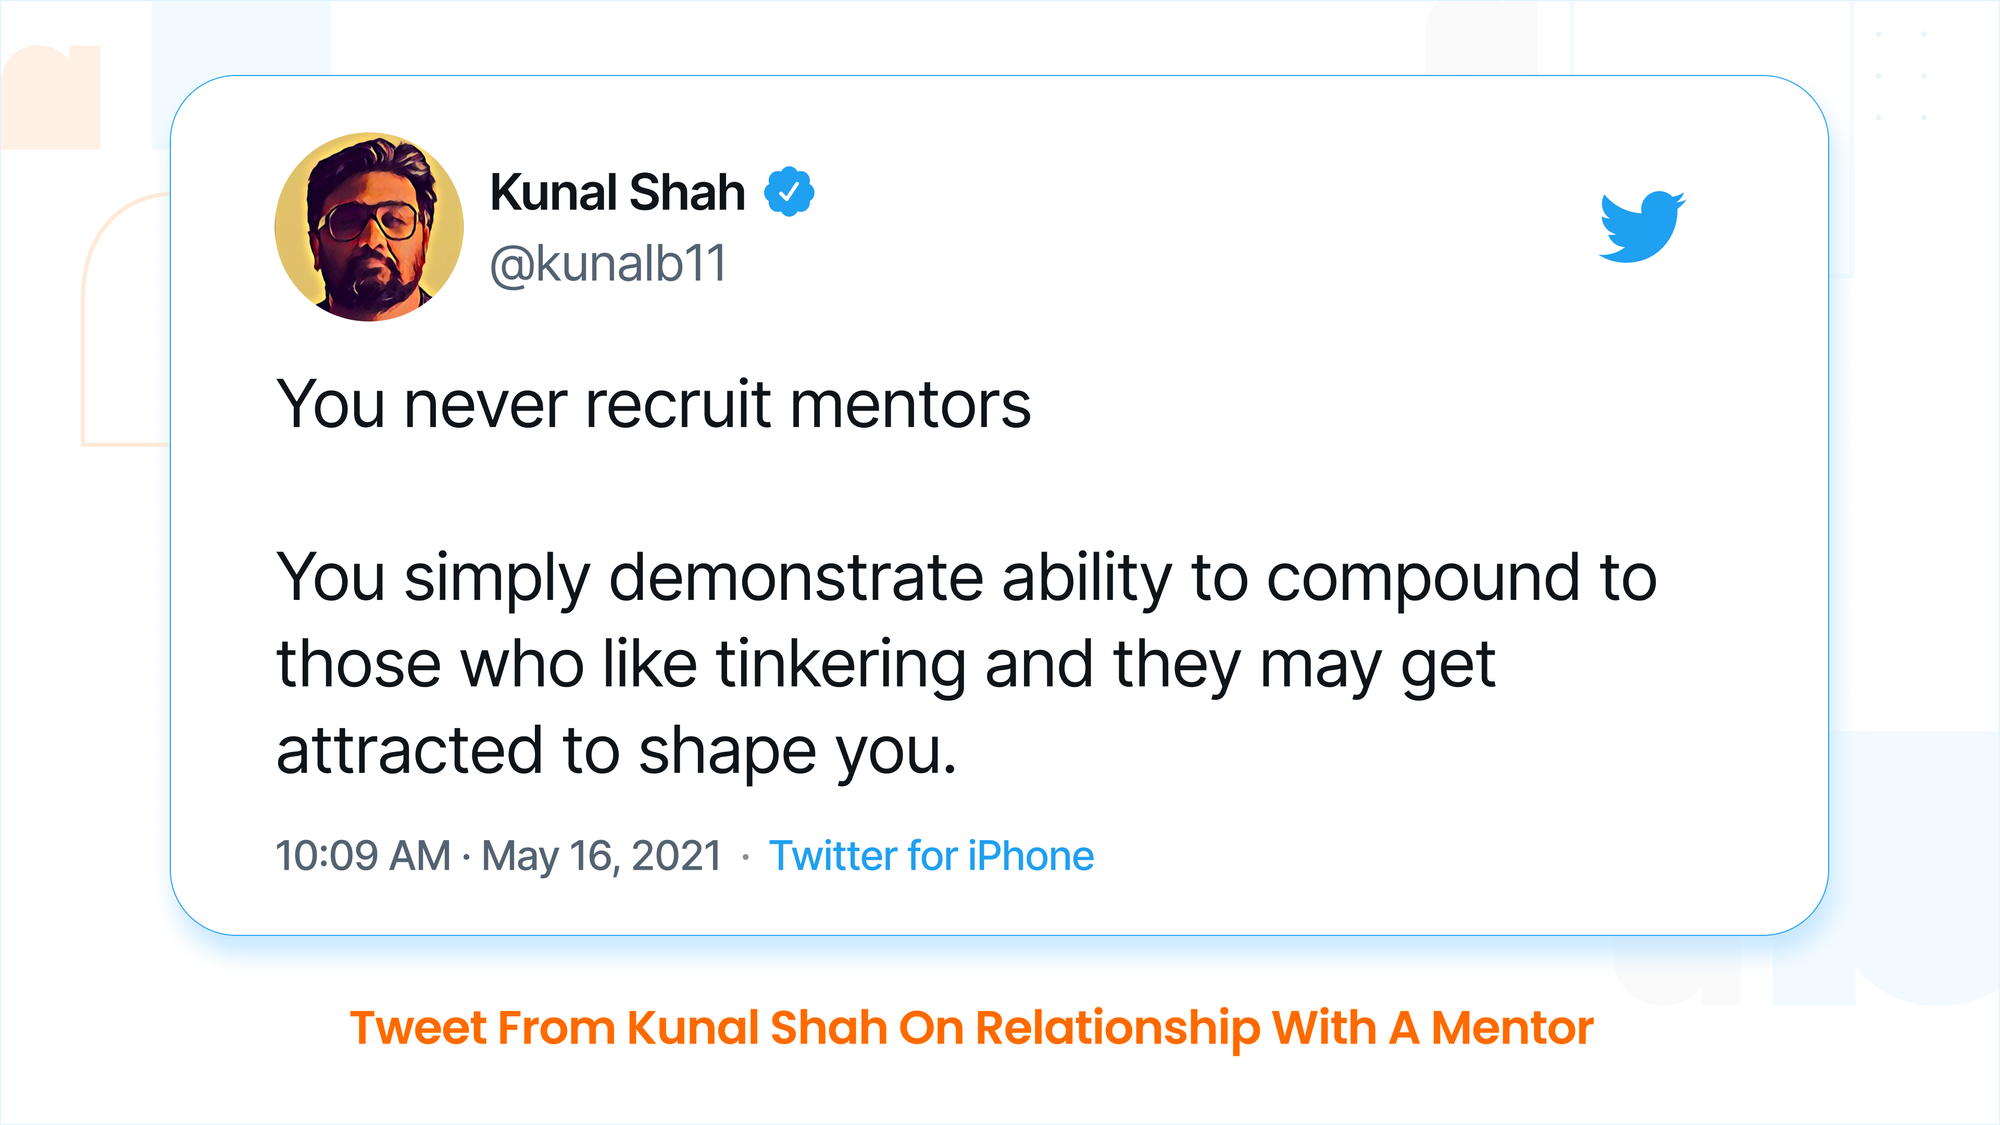 Role of Mentorship in Career Transition